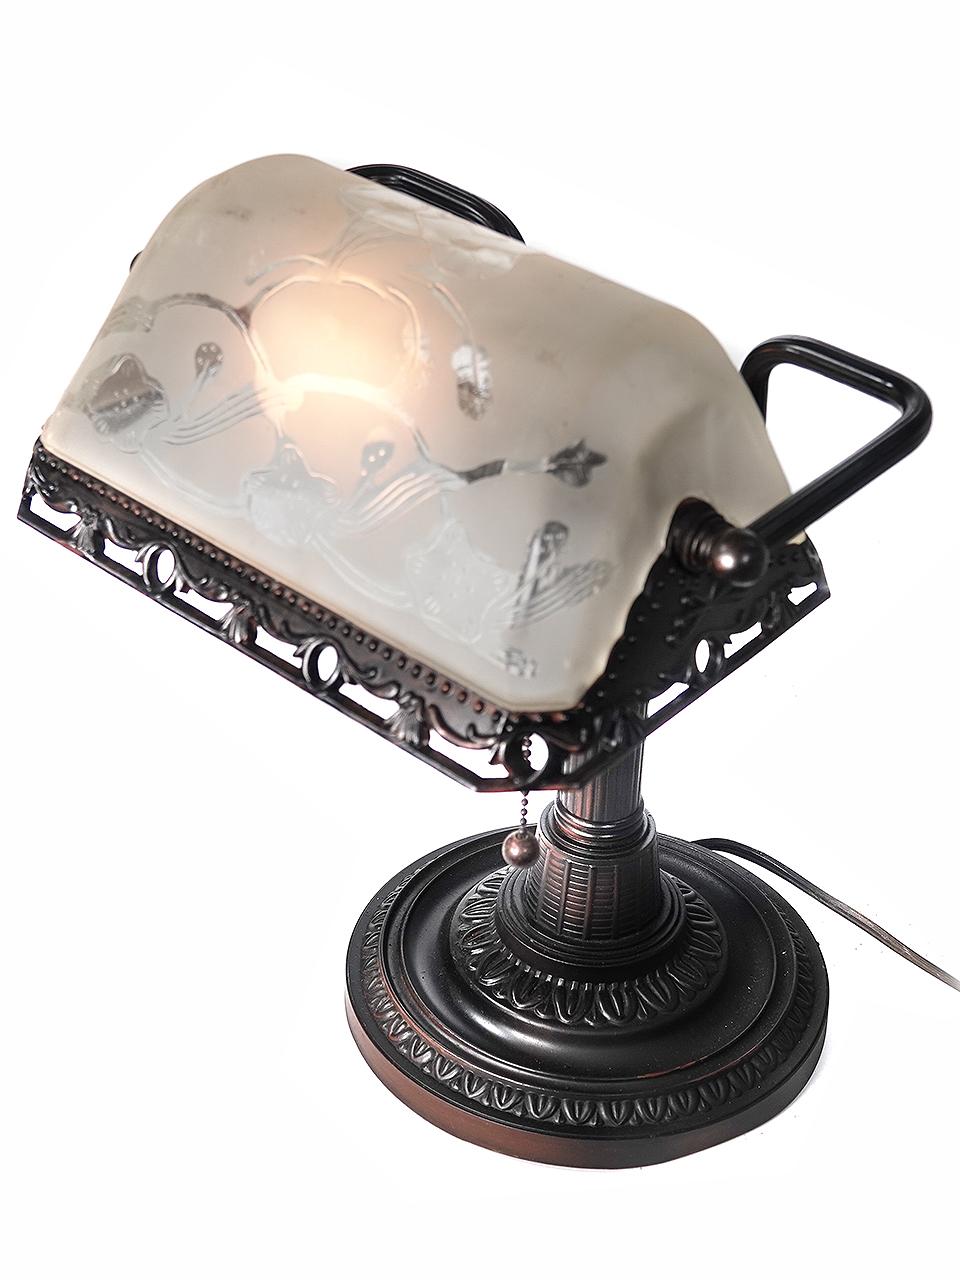 This banker's desk lamp or piano lamp has an original floral design glass shade that is cut to clear on a frosted background. The decorative metal work is finished in black.  